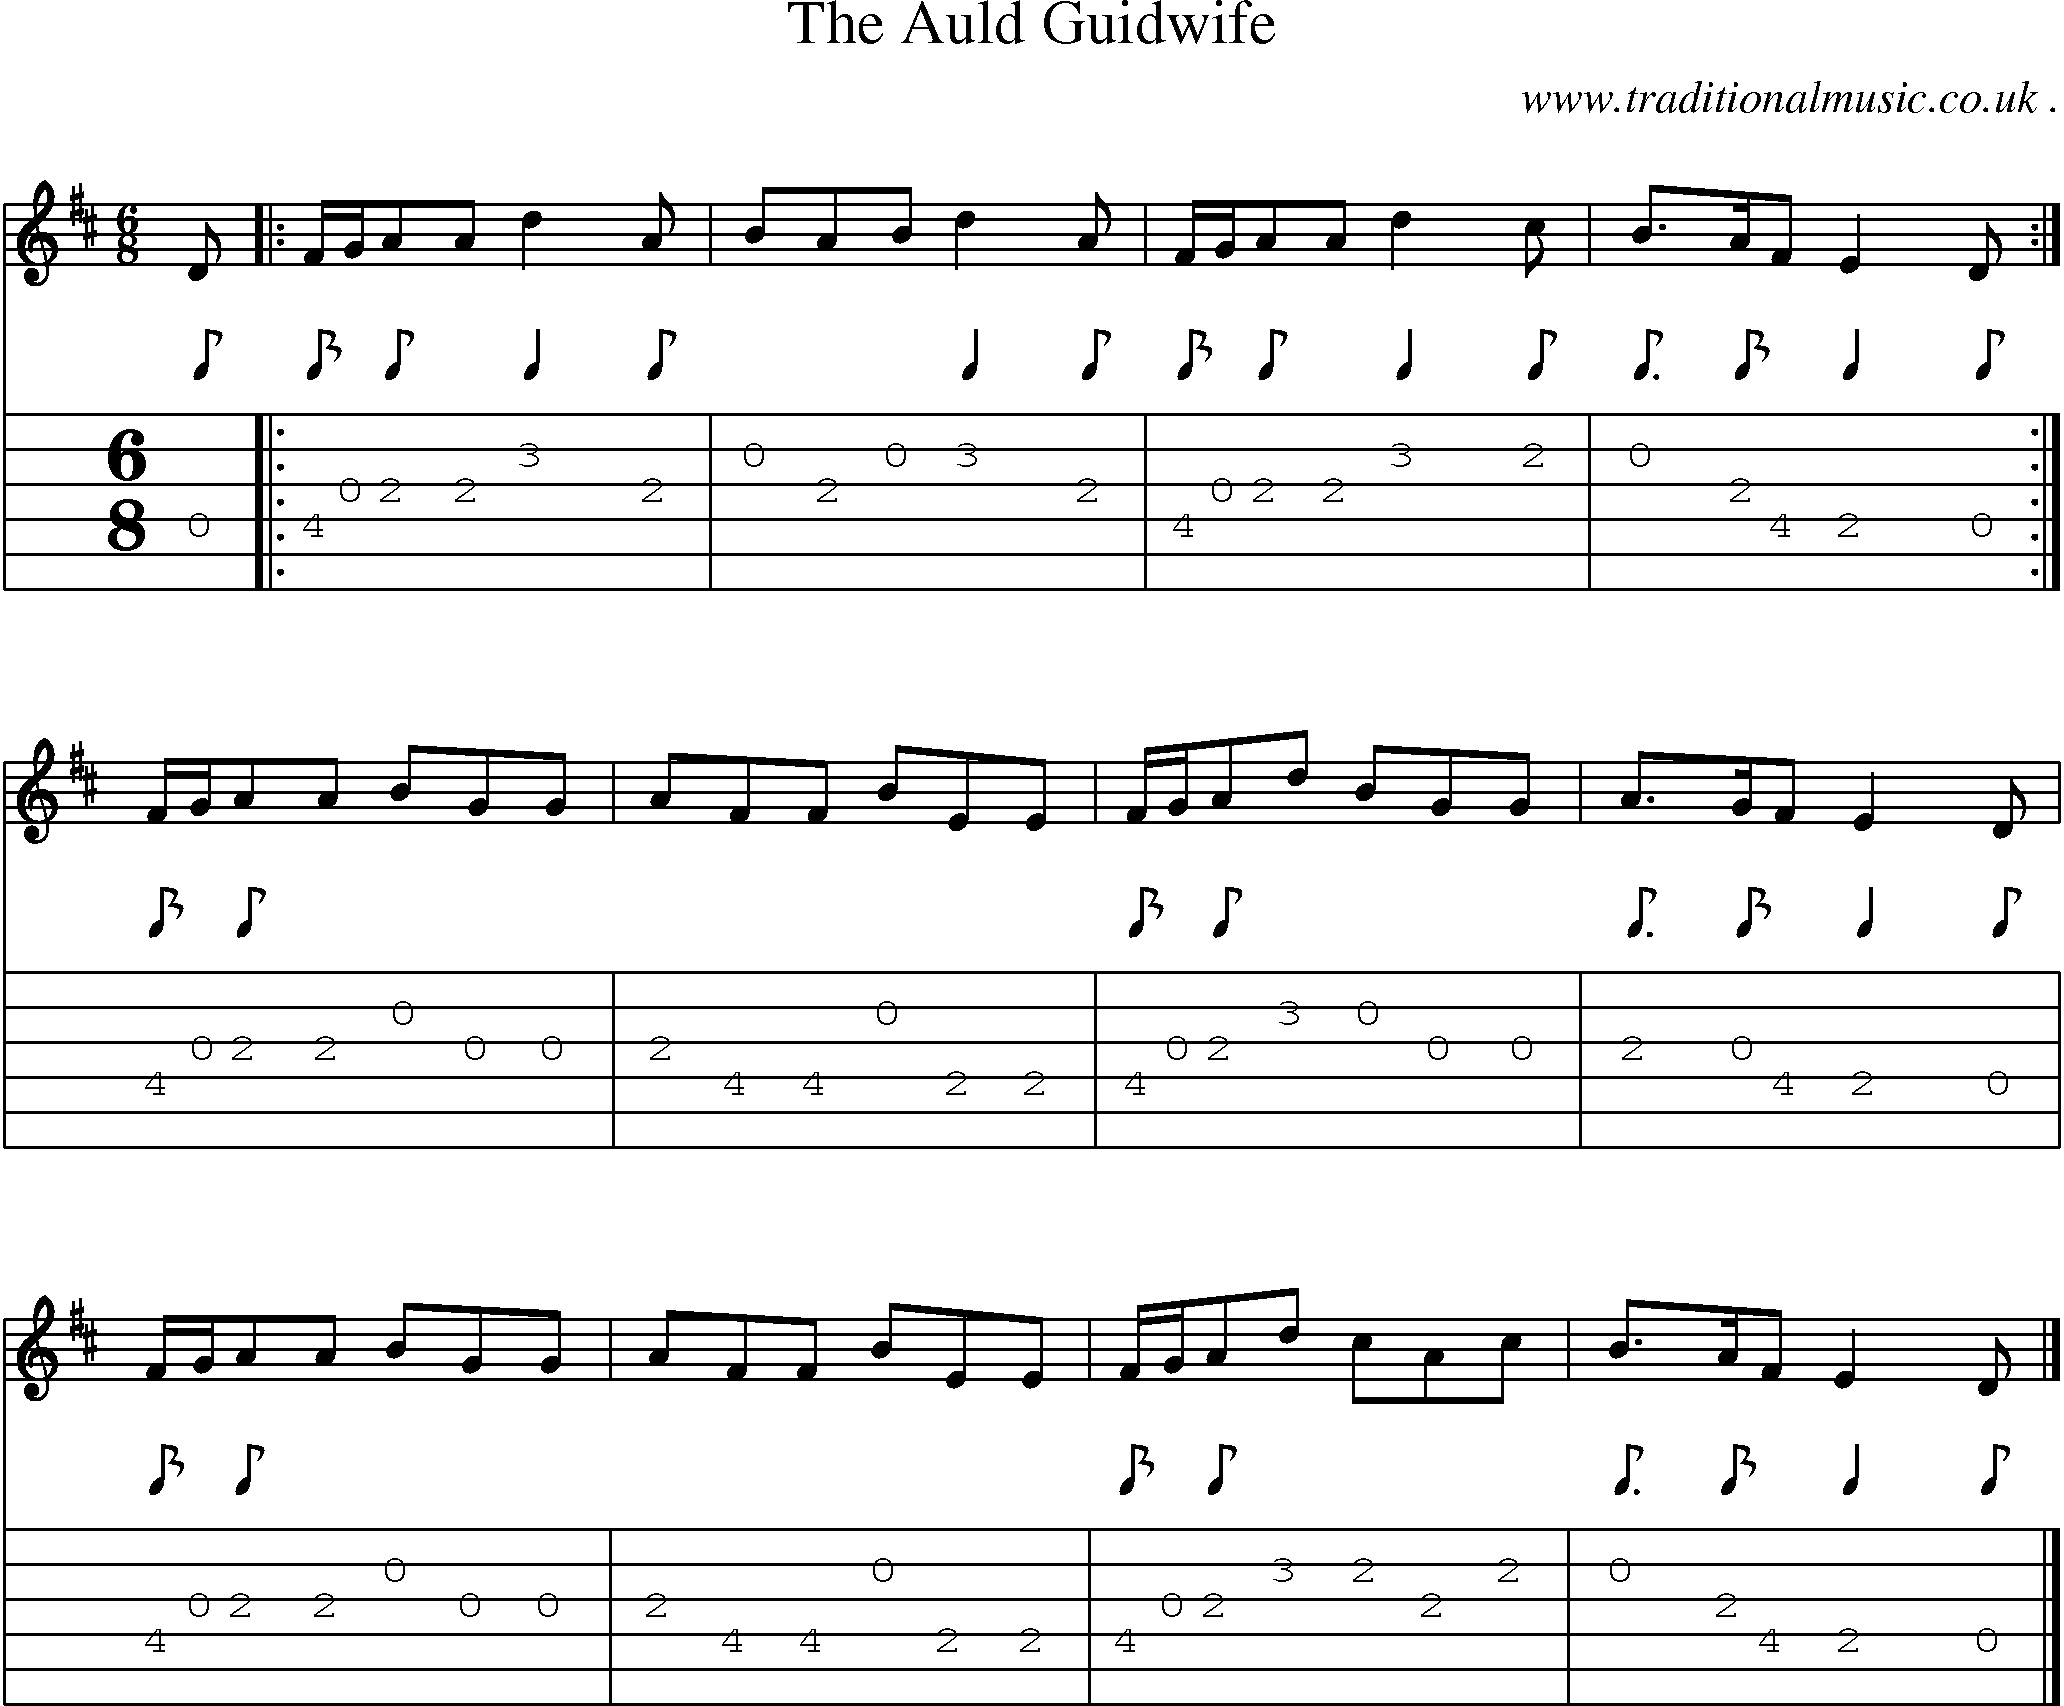 Sheet-music  score, Chords and Guitar Tabs for The Auld Guidwife